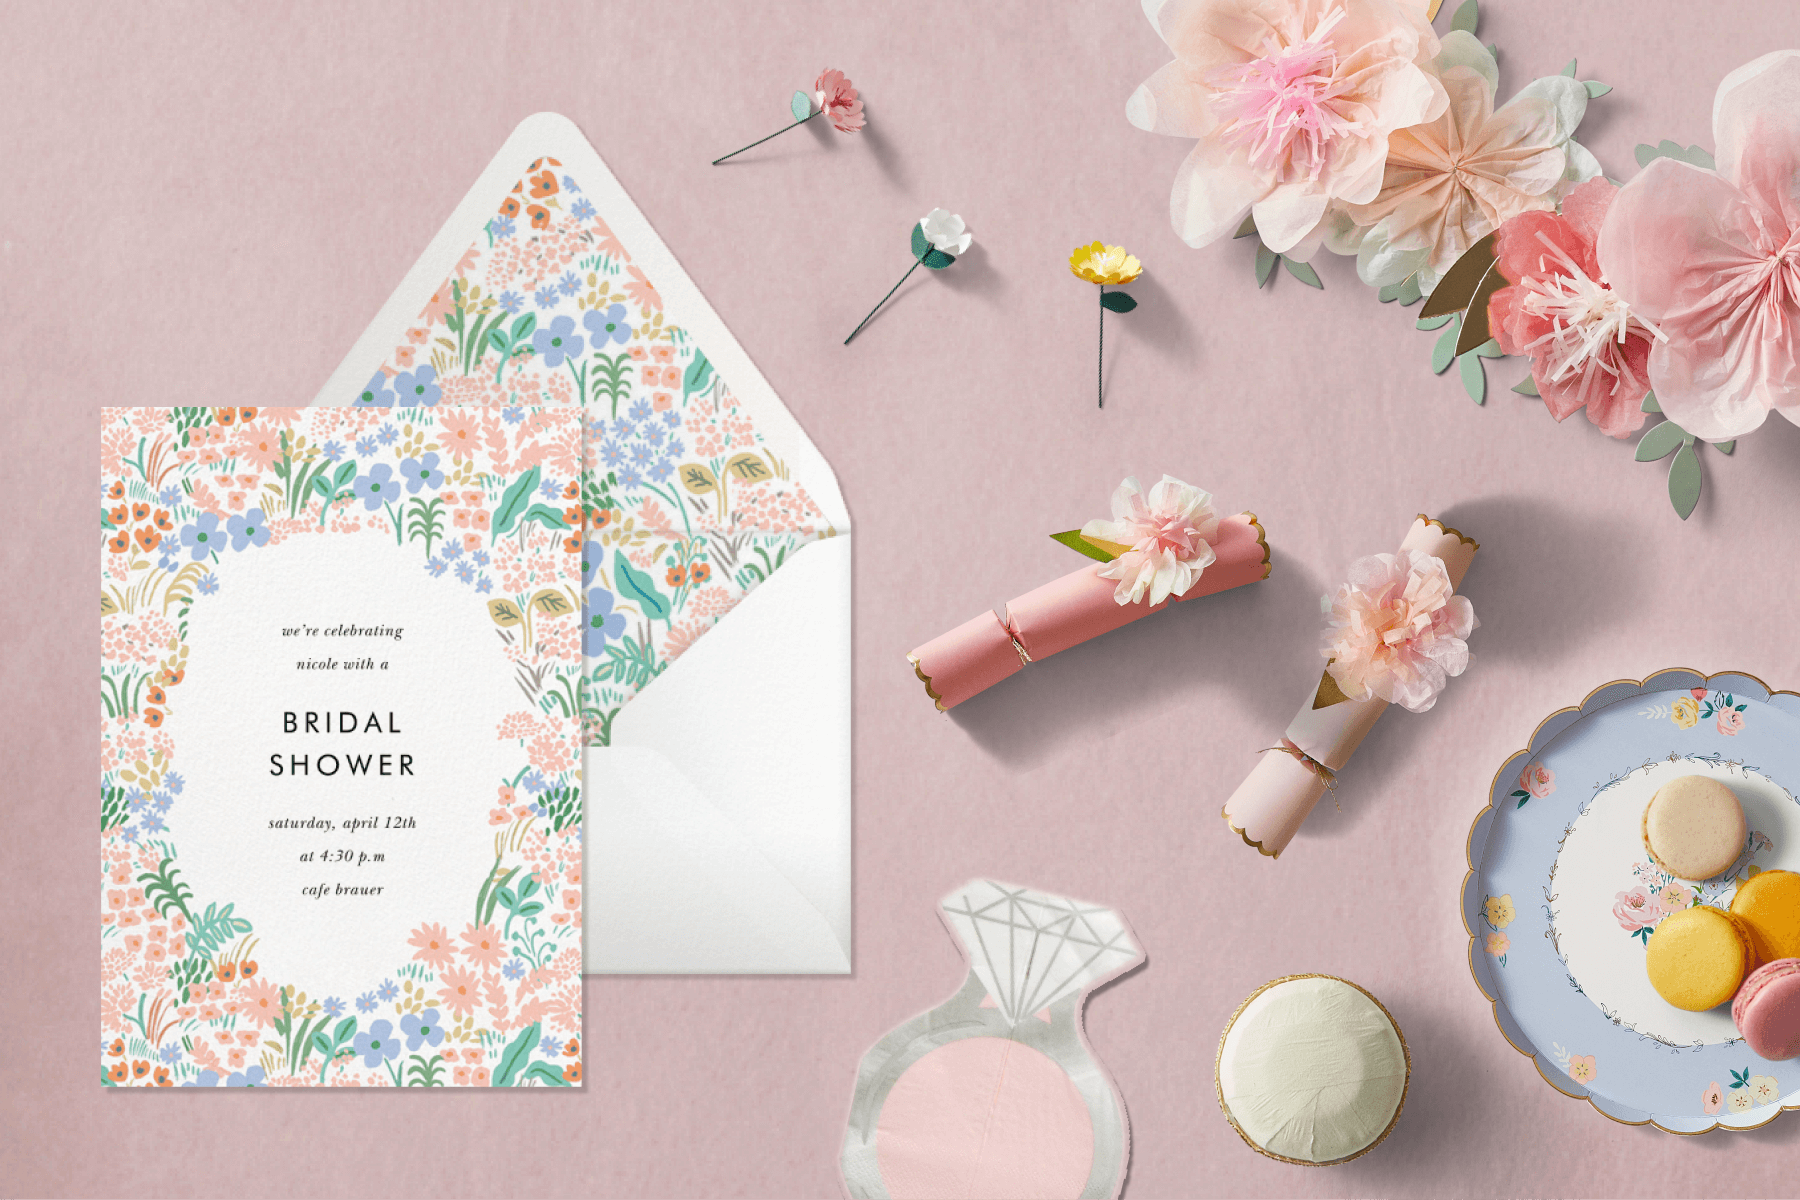 A bridal shower invitation and supplies like plates, poppers, and a garland.